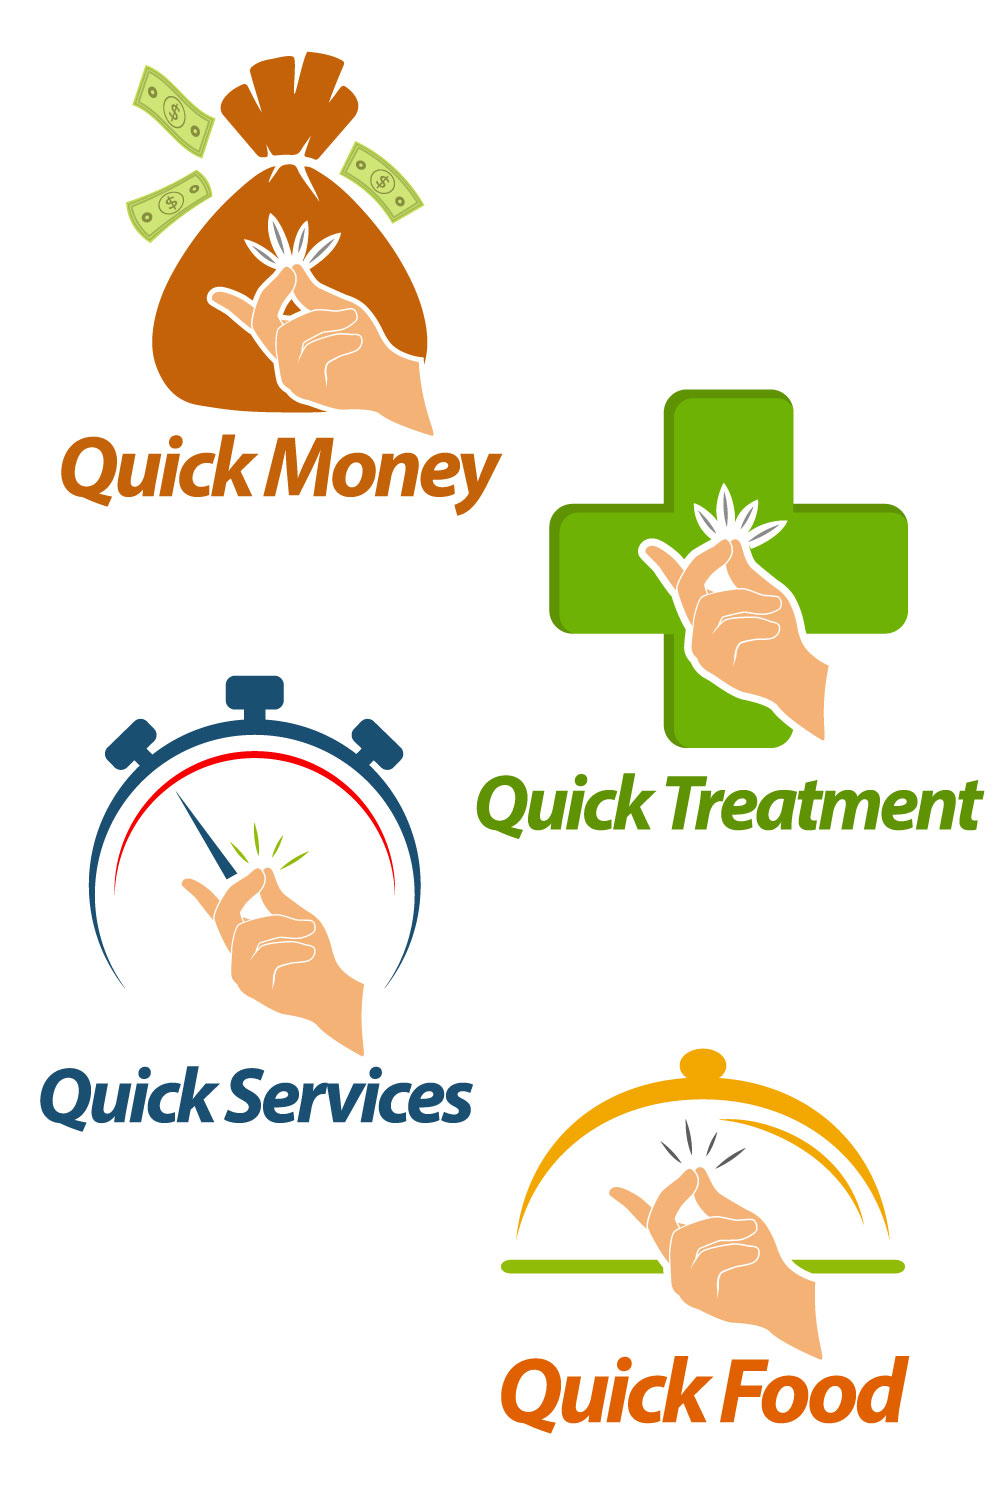 Quick and Easy Services Icons Bundle pinterest image.